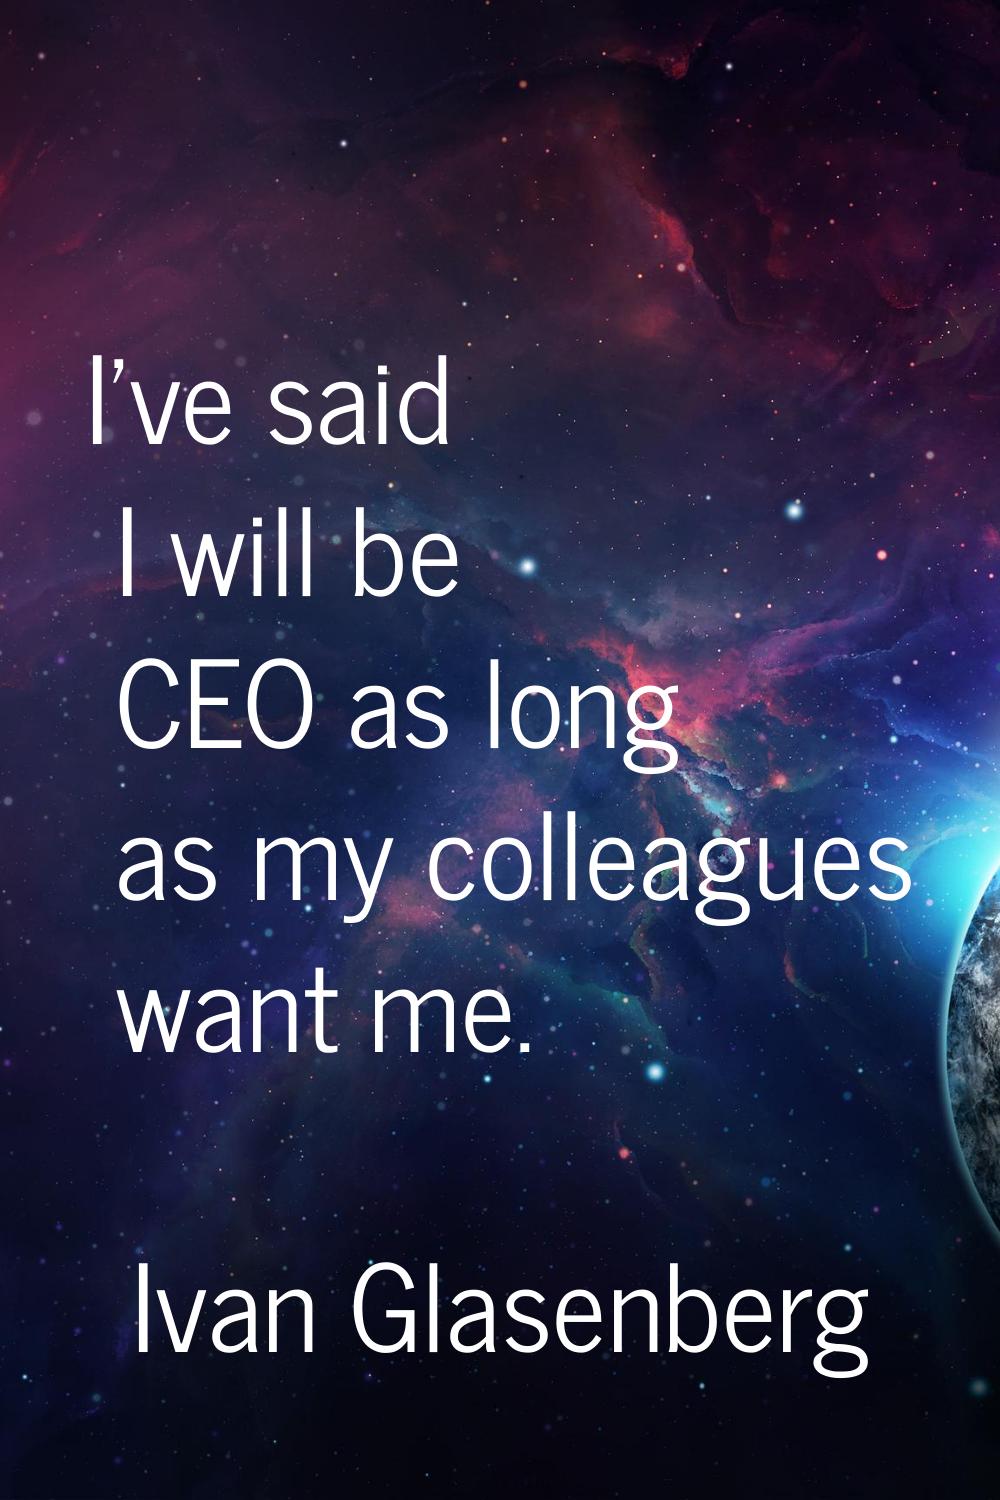 I've said I will be CEO as long as my colleagues want me.